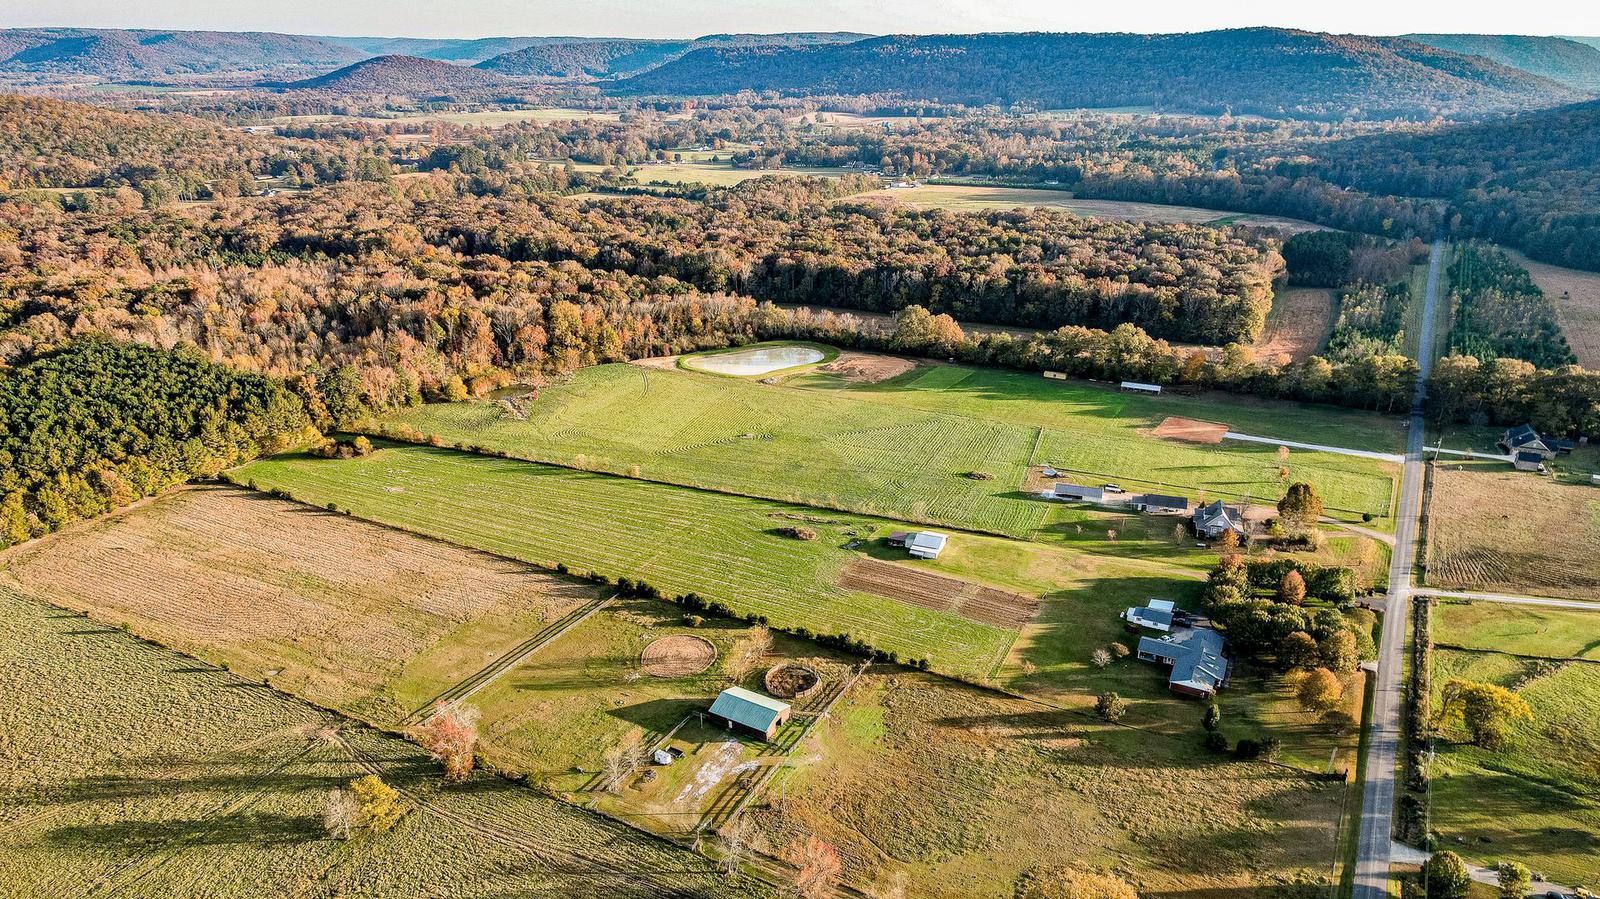 An aerial view of the rural valley below the home.